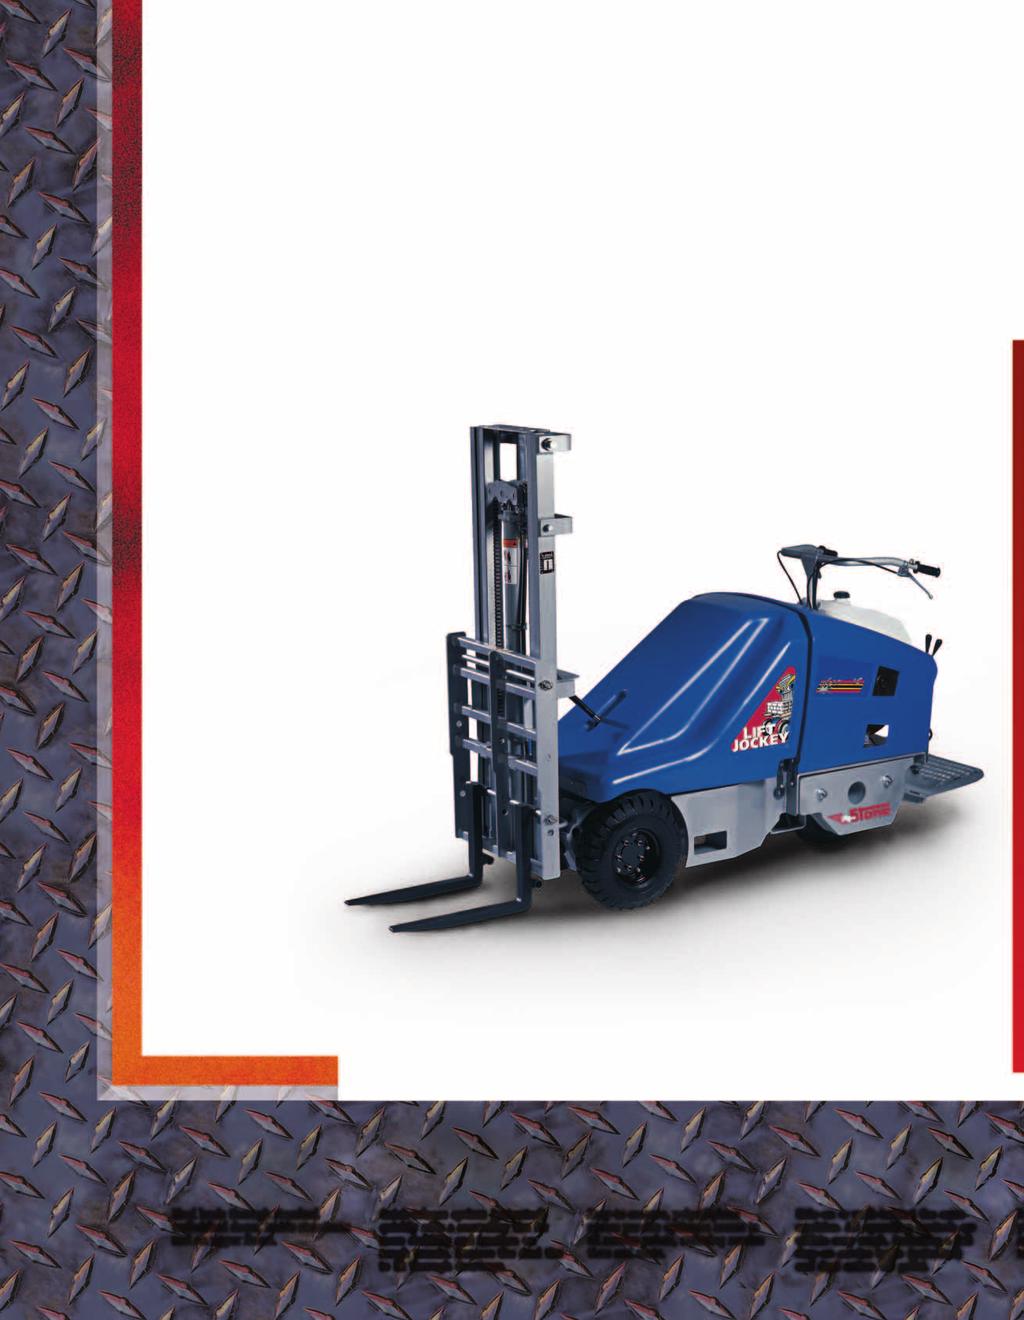 Go Through Unfinished Doors And Work On Upper Floors, Too With this versatile, narrow version LJS2000 ride-on Lift Jockey, you can easily move and lift pallets, blocks, packaged material, and more